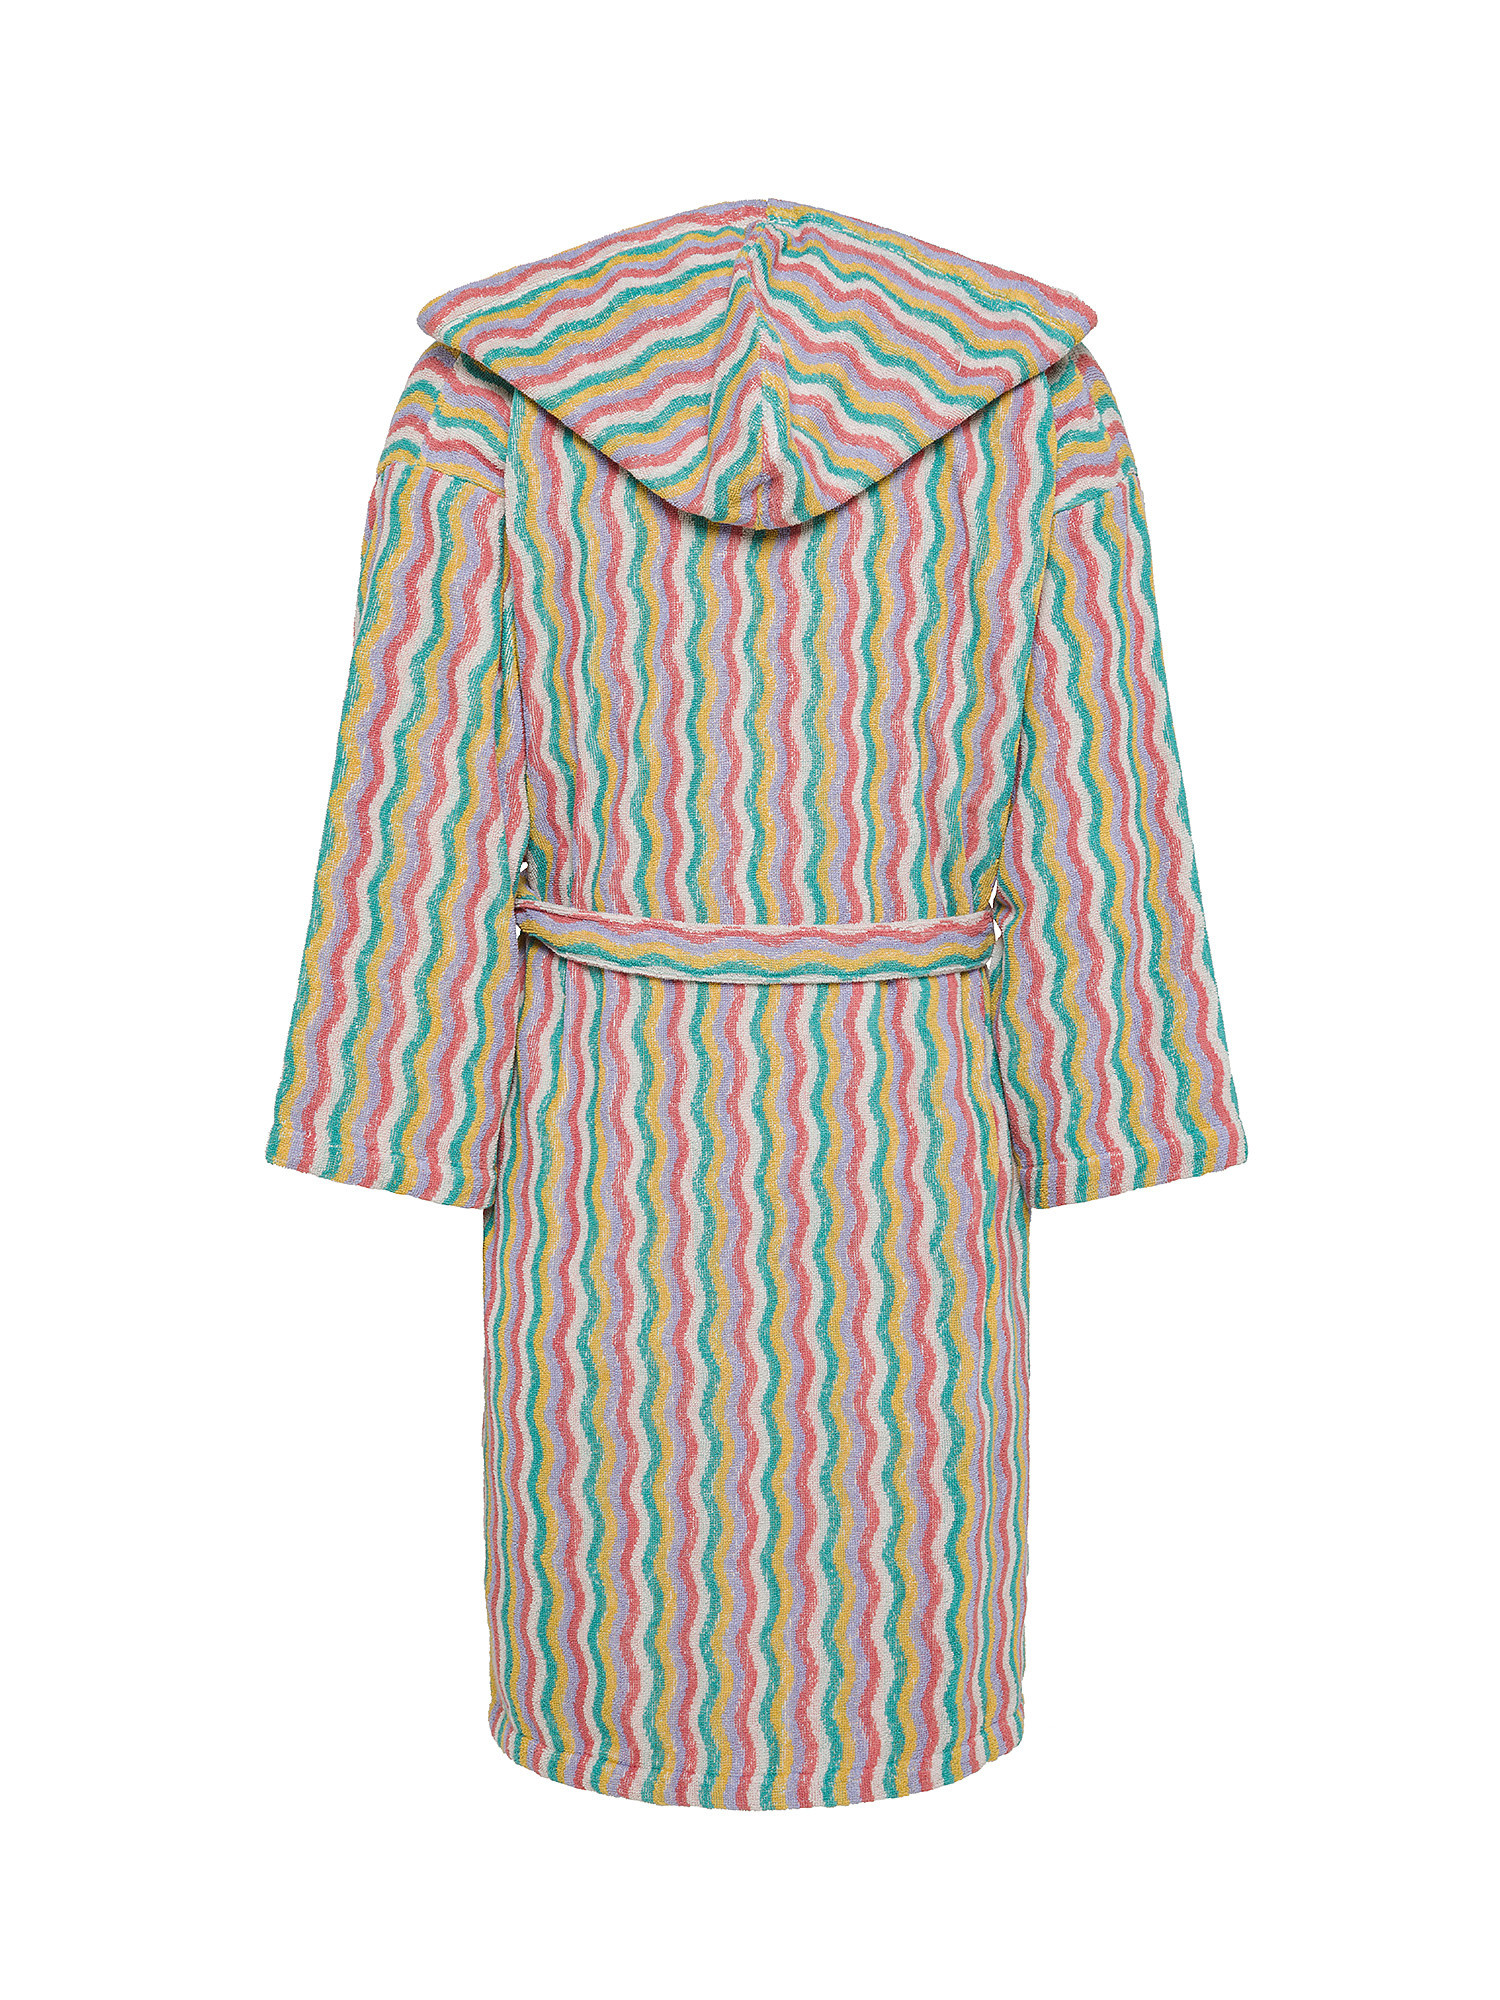 Terry cotton bathrobe with zig zag motif, Multicolor, large image number 1